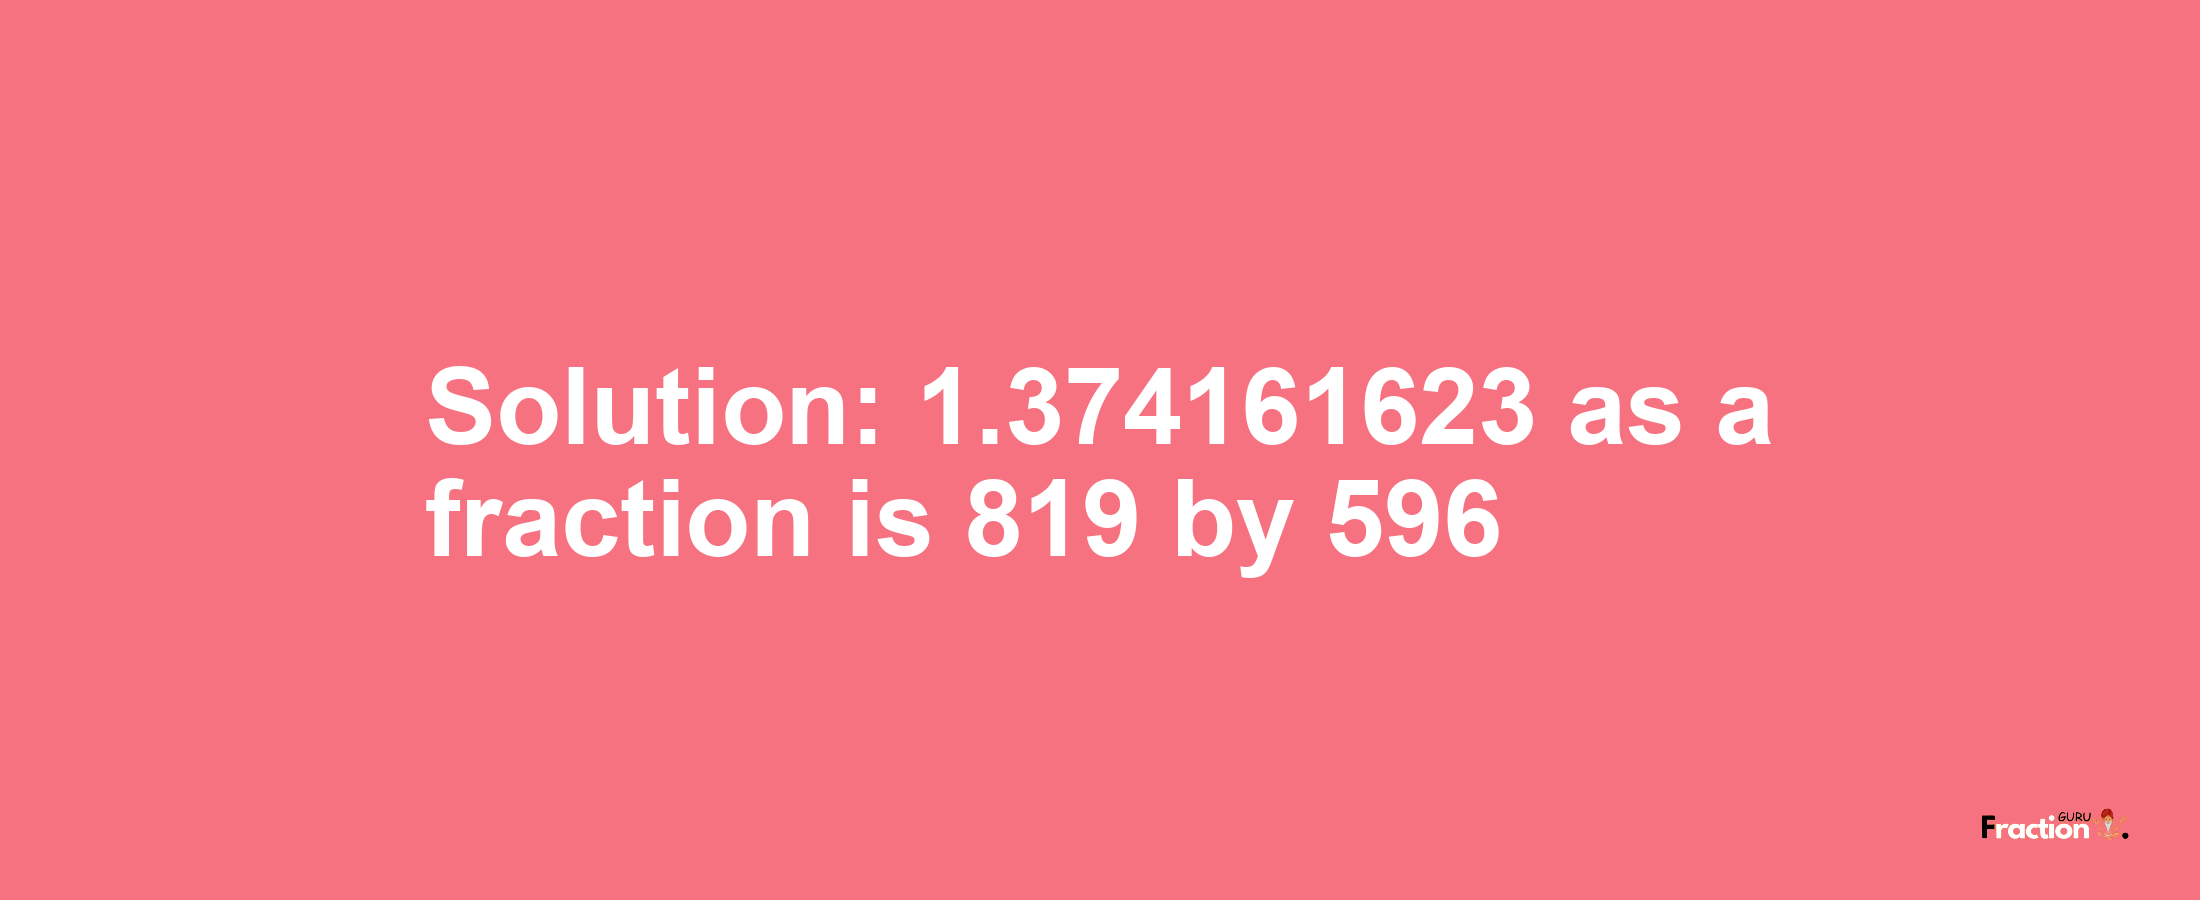 Solution:1.374161623 as a fraction is 819/596